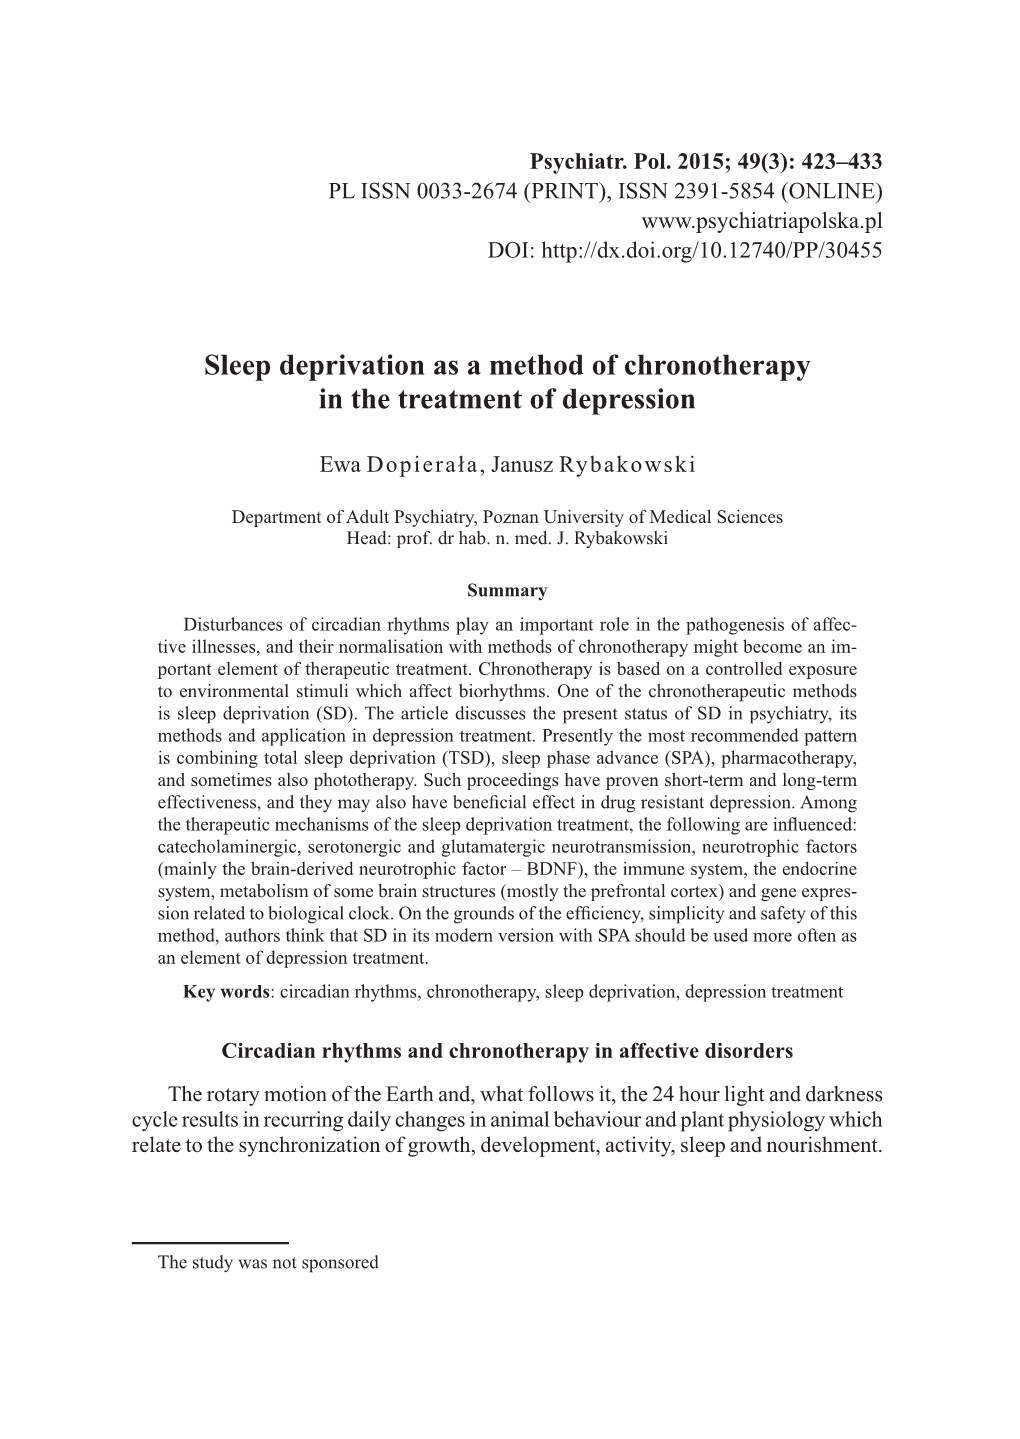 Sleep Deprivation As a Method of Chronotherapy in the Treatment of Depression